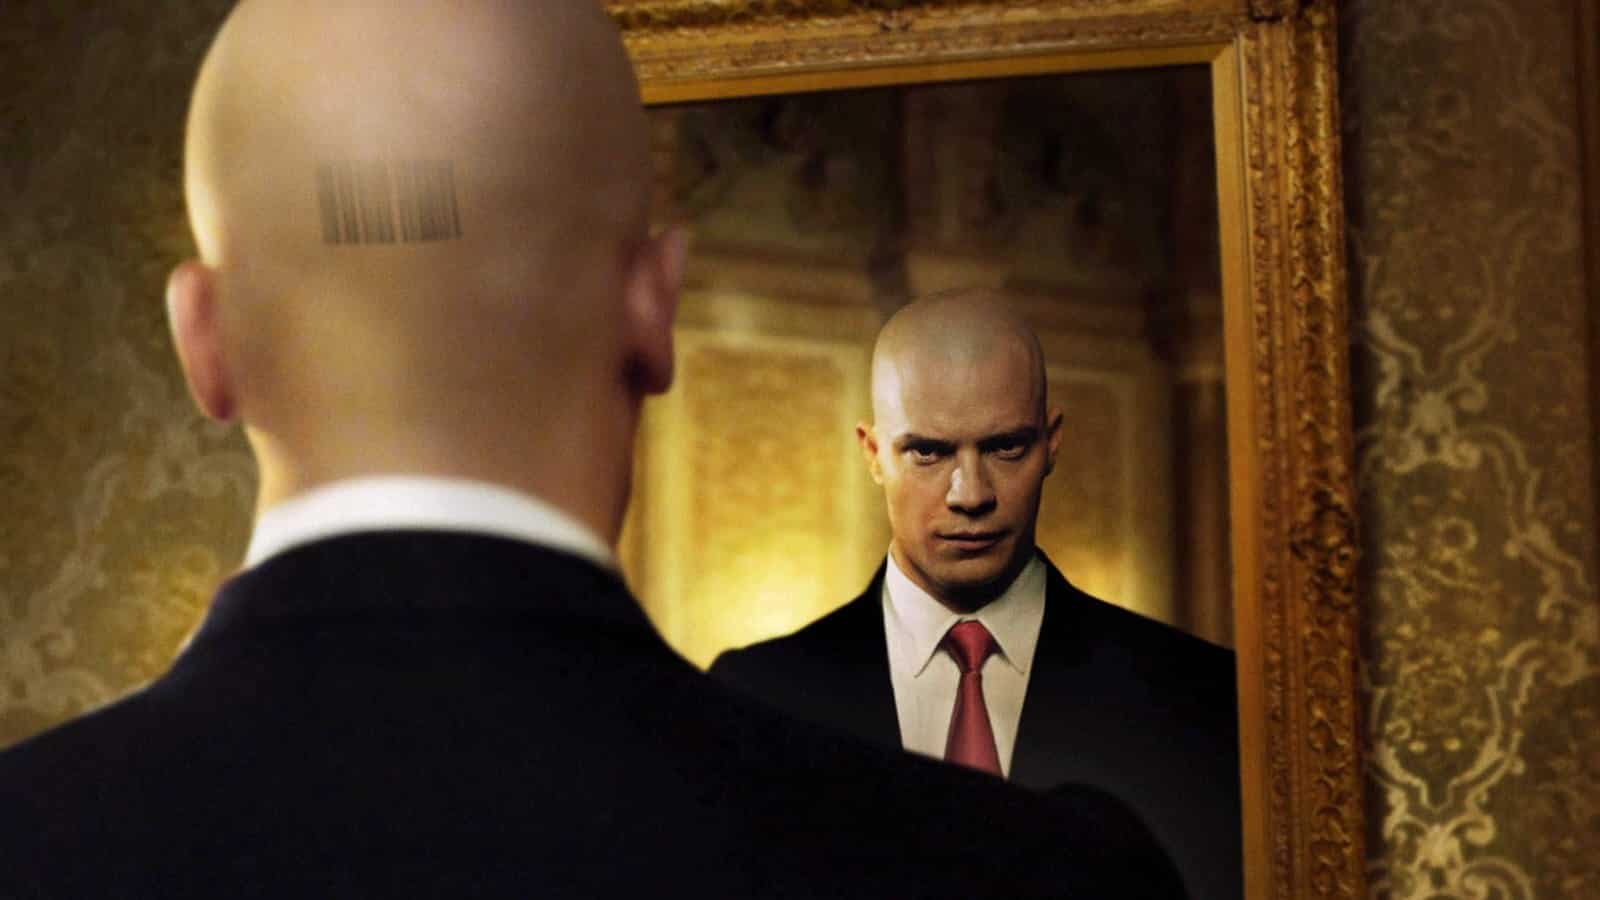 Agent 47 looking in the mirror with the code on his head